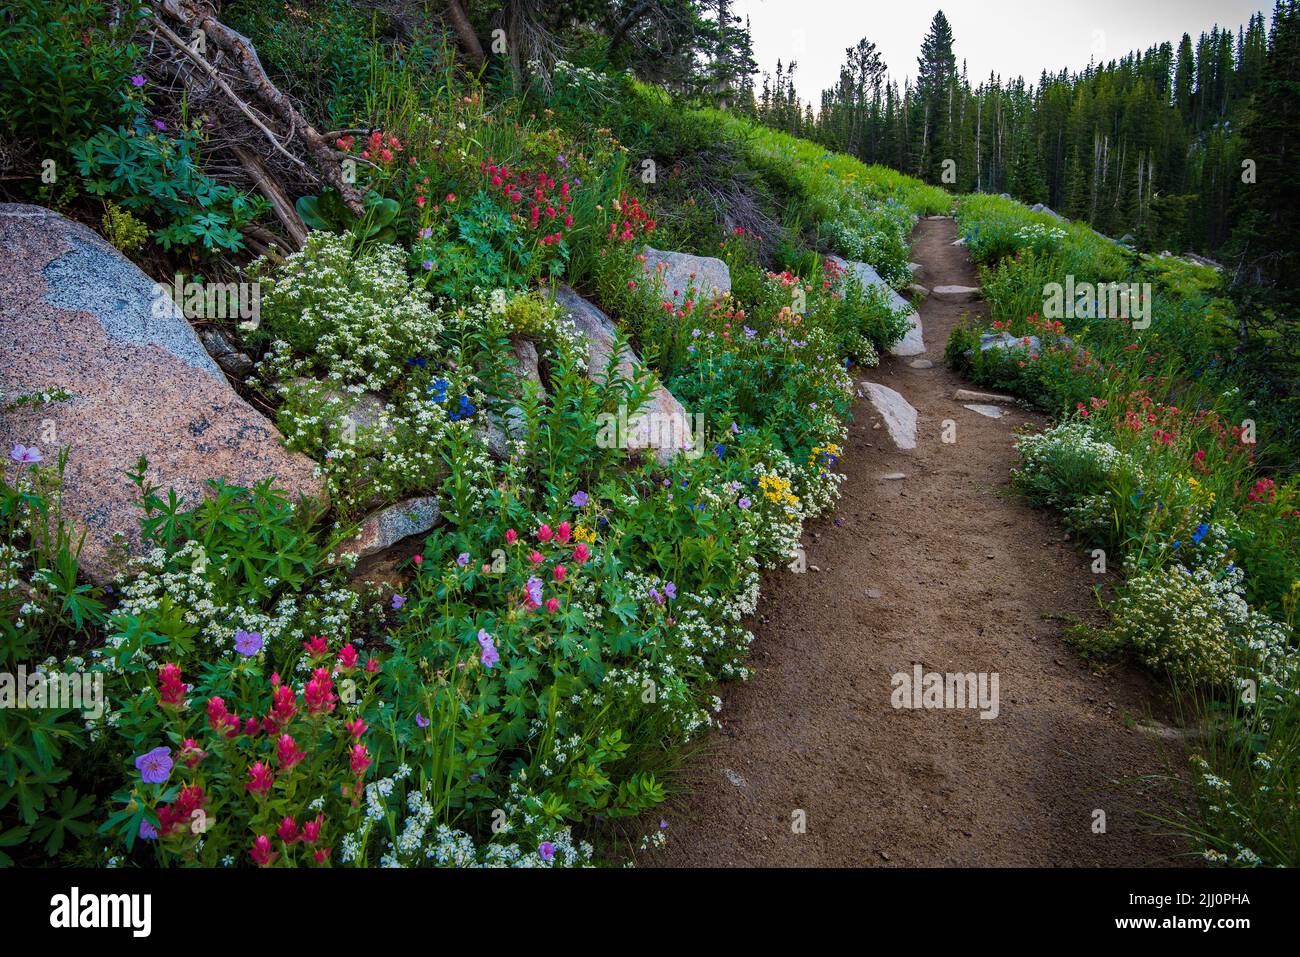 A mountain trail lined with vibrant wildflowers. The Albion Basin near Salt Lake City is world famous for its beautiful and prolific wildflowers. Stock Photo